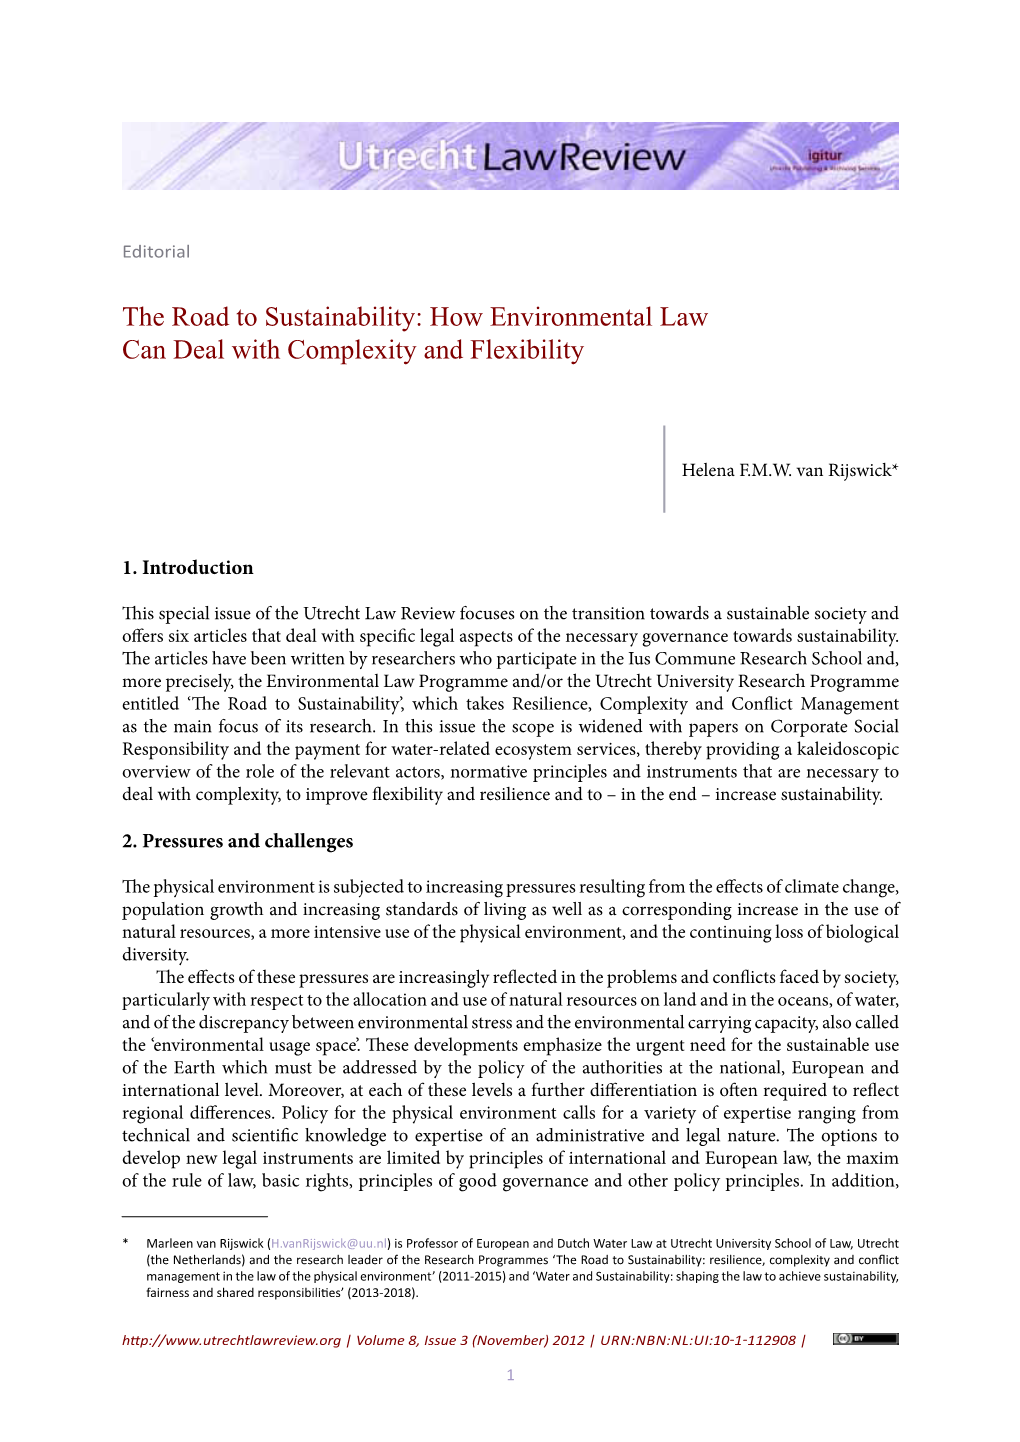 How Environmental Law Can Deal with Complexity and Flexibility